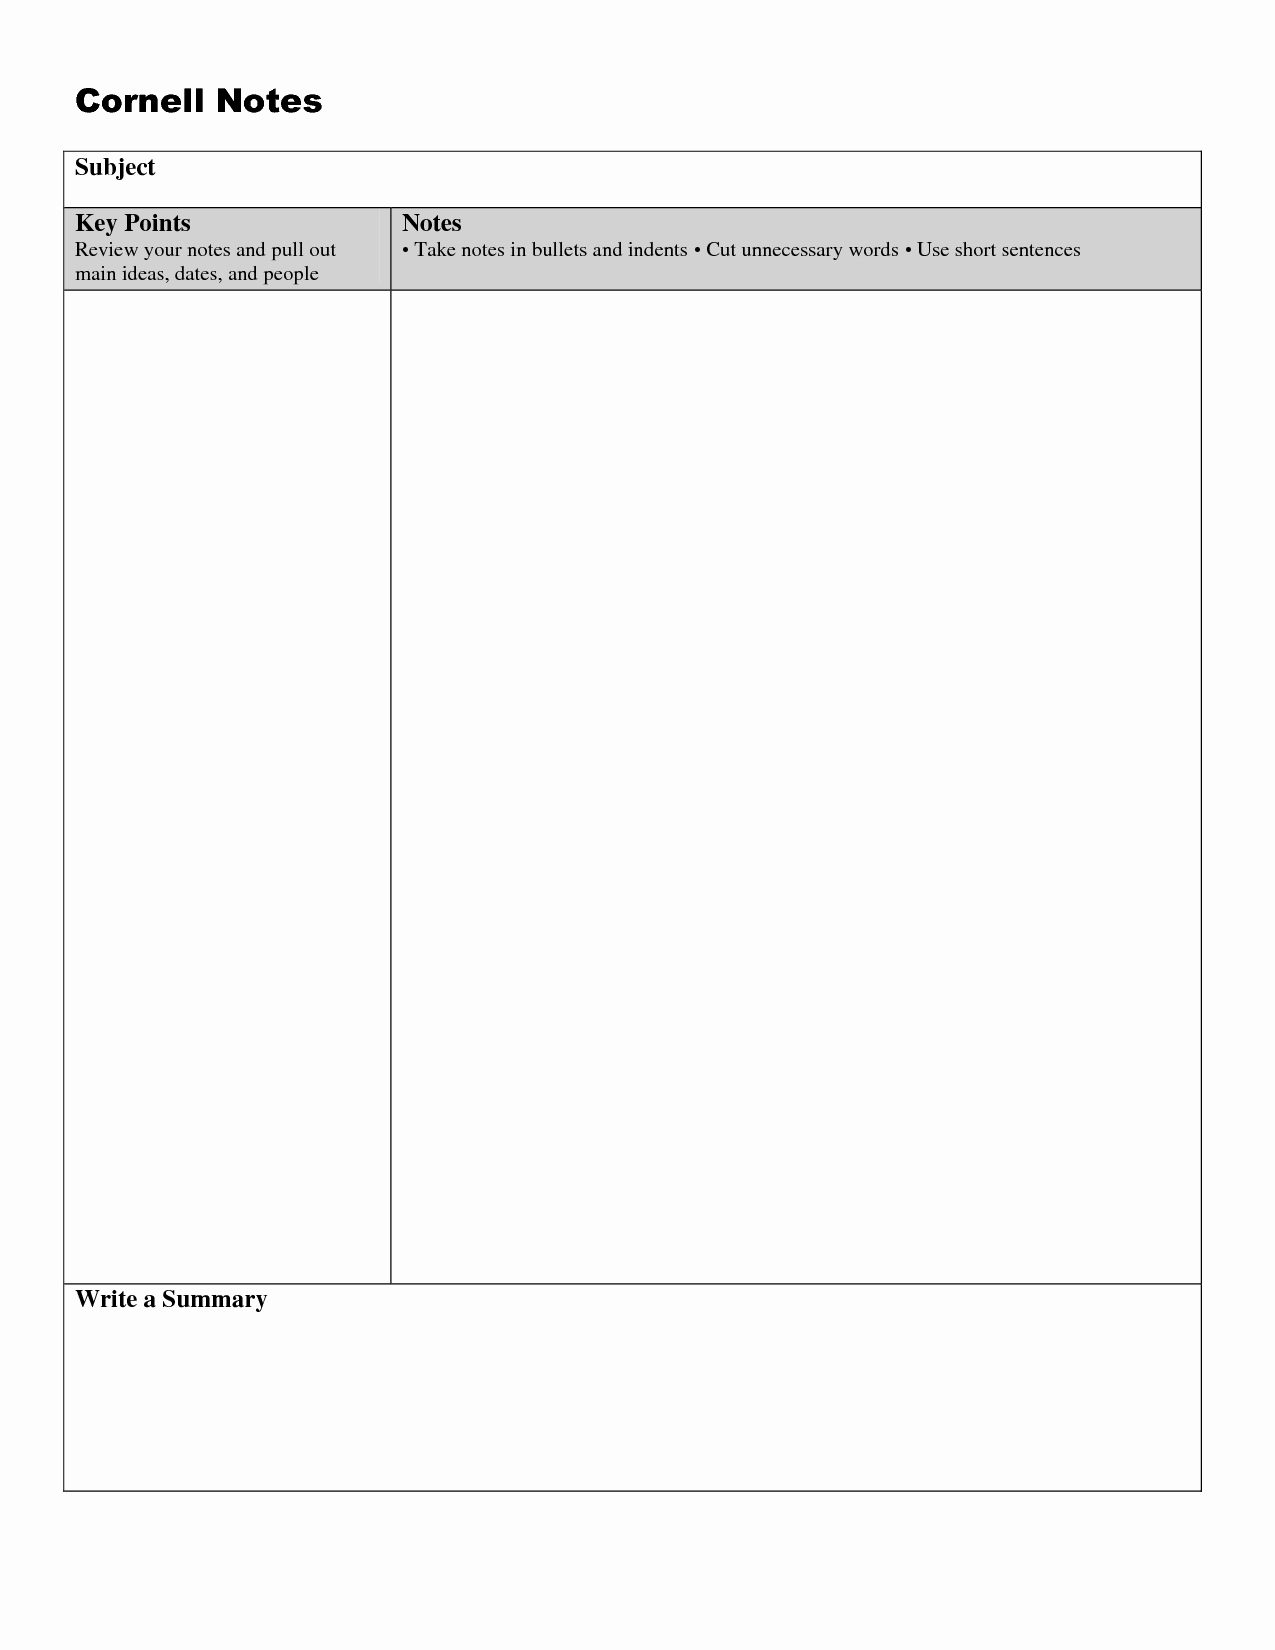 Cornell Note Template Word Best Of Cornell Notes Template Doc Cornell Notes Template Doc